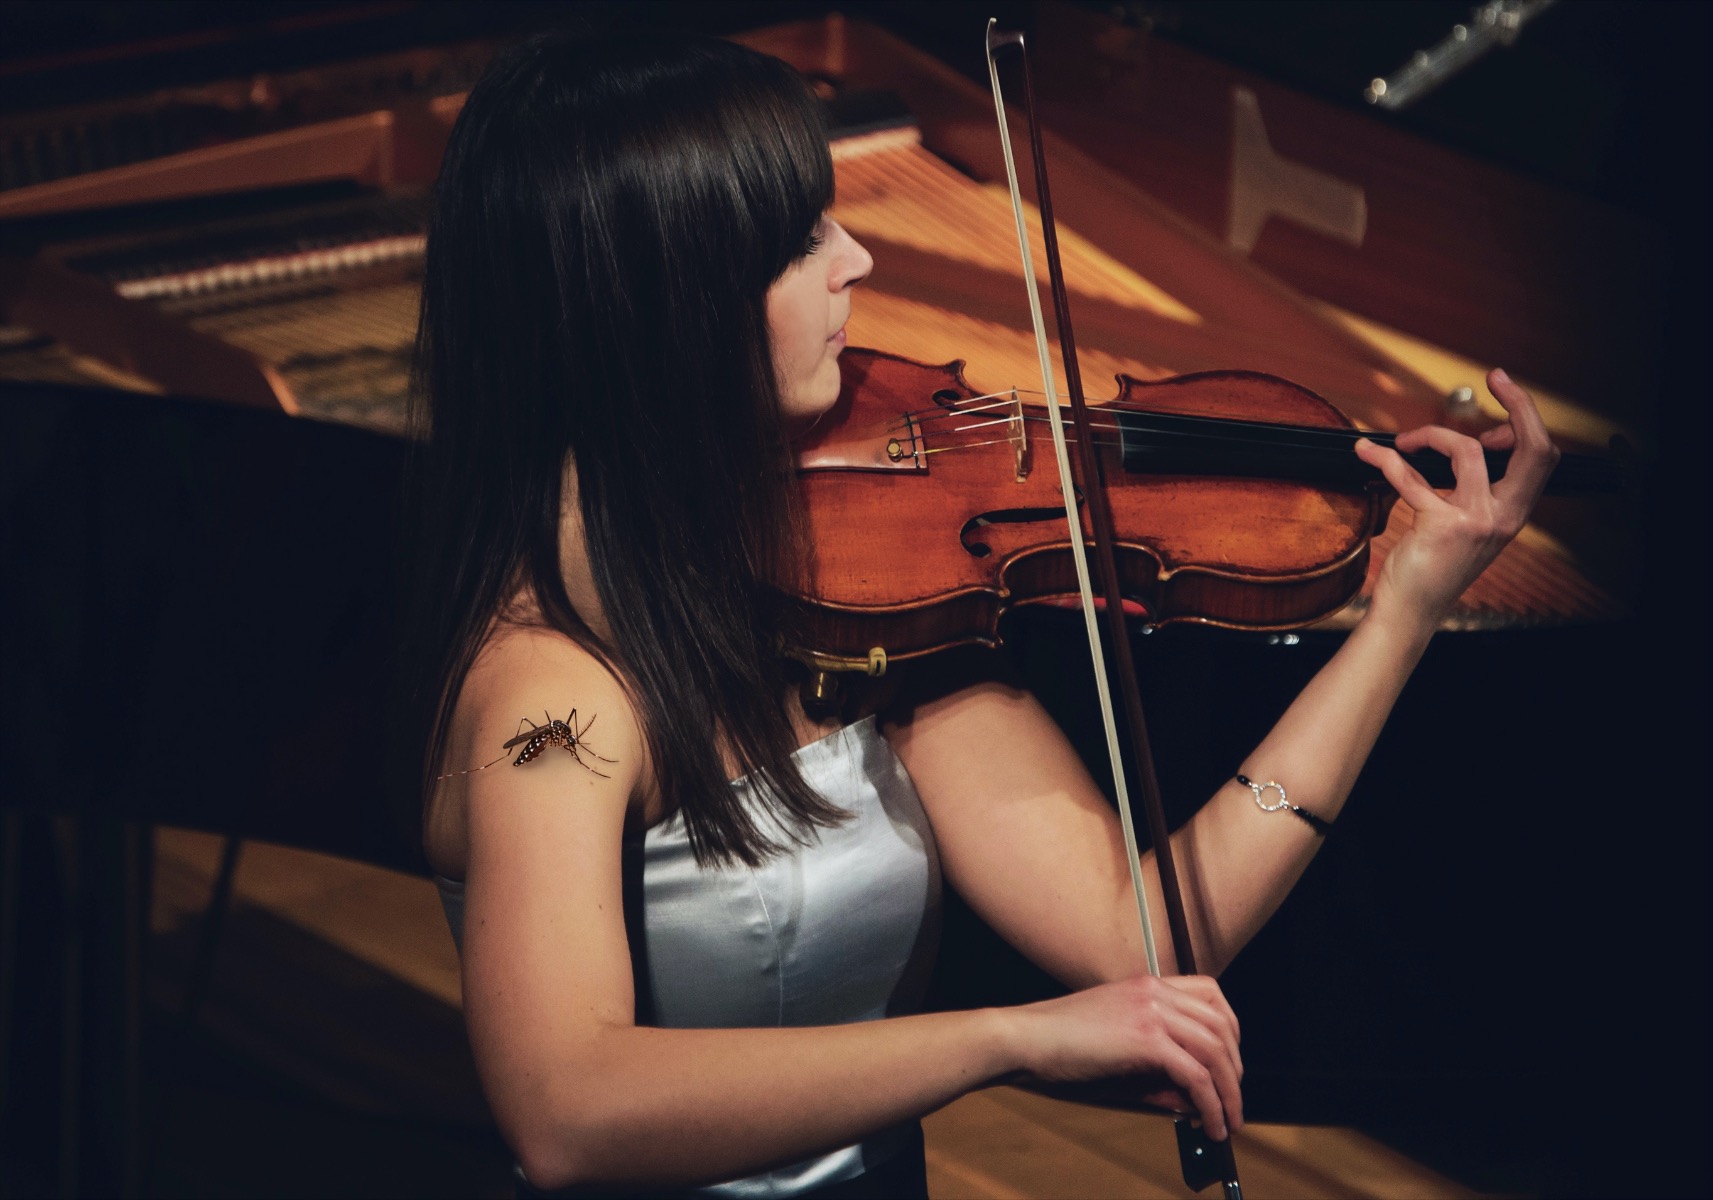 Violinist with a HUGE mosquito on her shoulder performing on stage in front of a piano